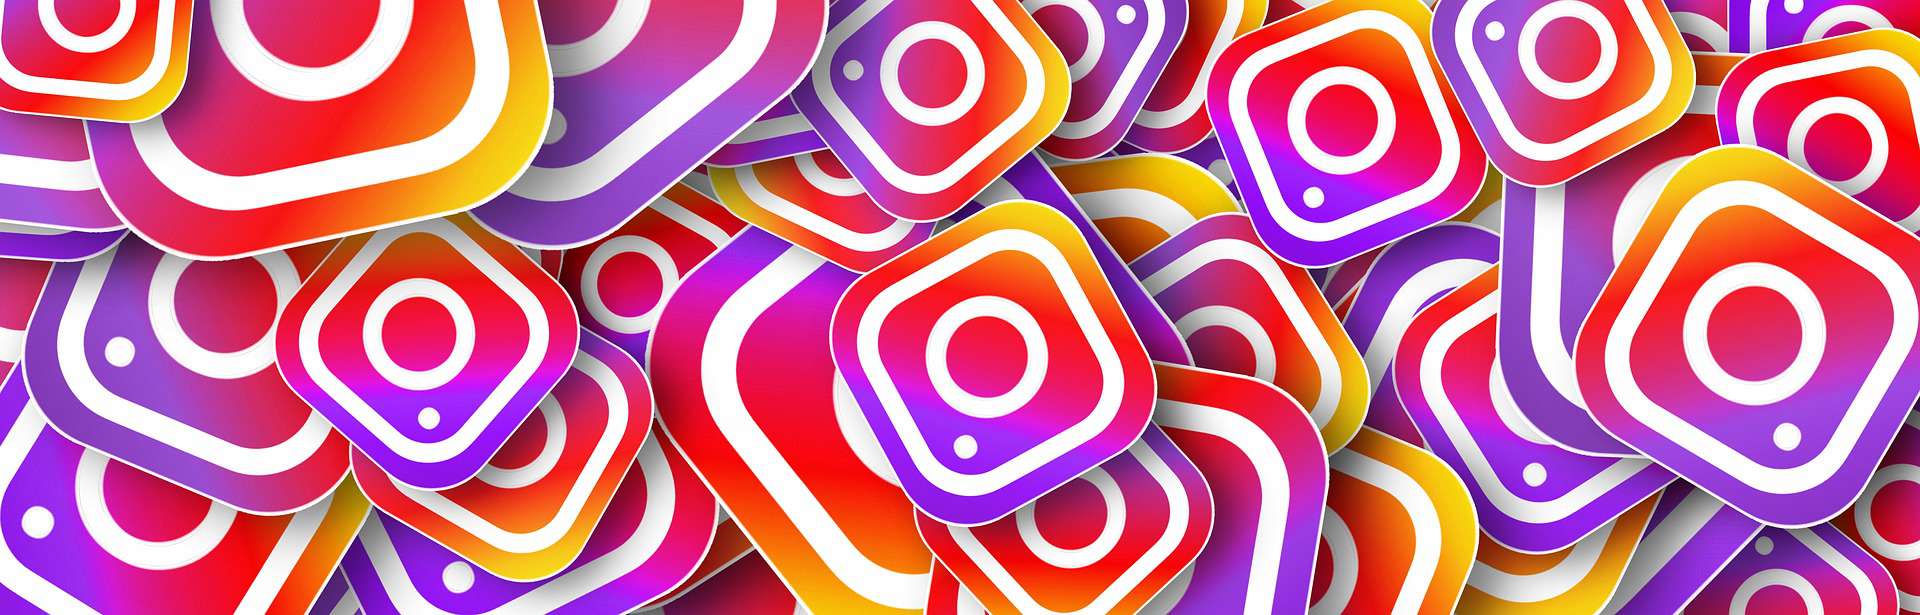 Instagram Marketing Ideas for Hair and Beauty Salons | Local Fame